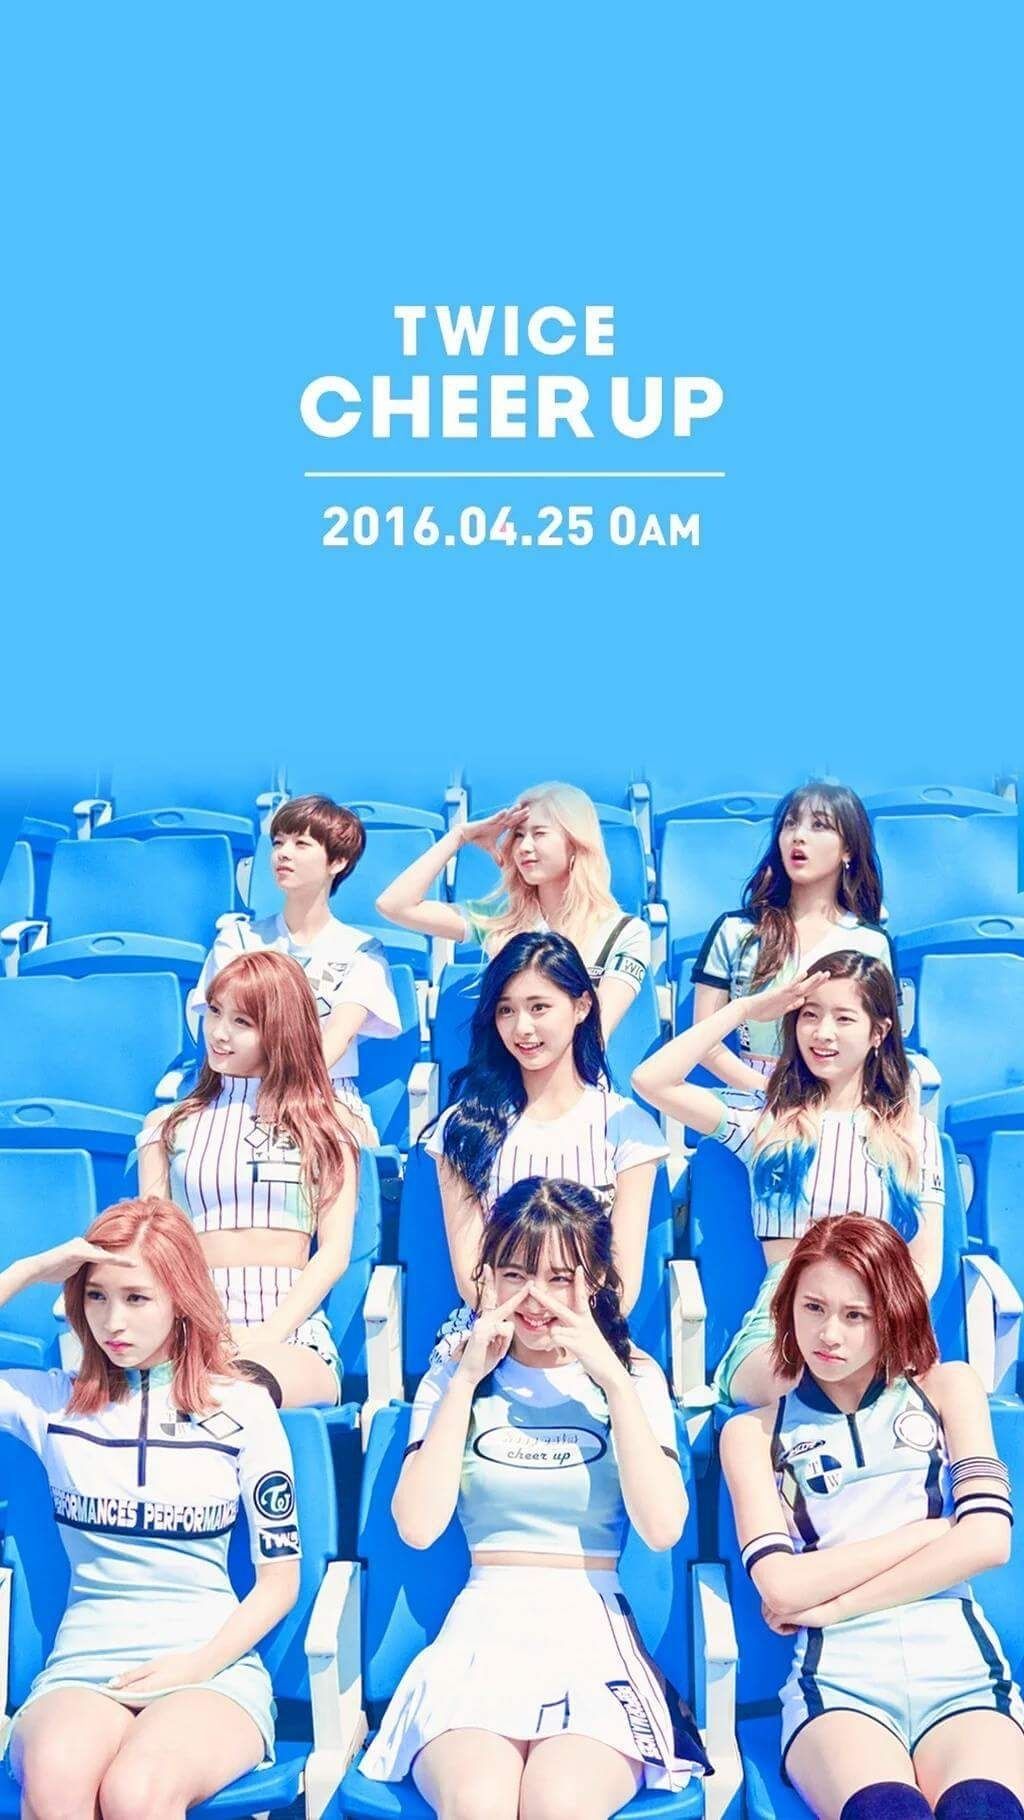 Most Popular Twice Cheer Up Wallpaper FULL HD 1080p For PC Desk. Cheer up, Twice, Girl group picture